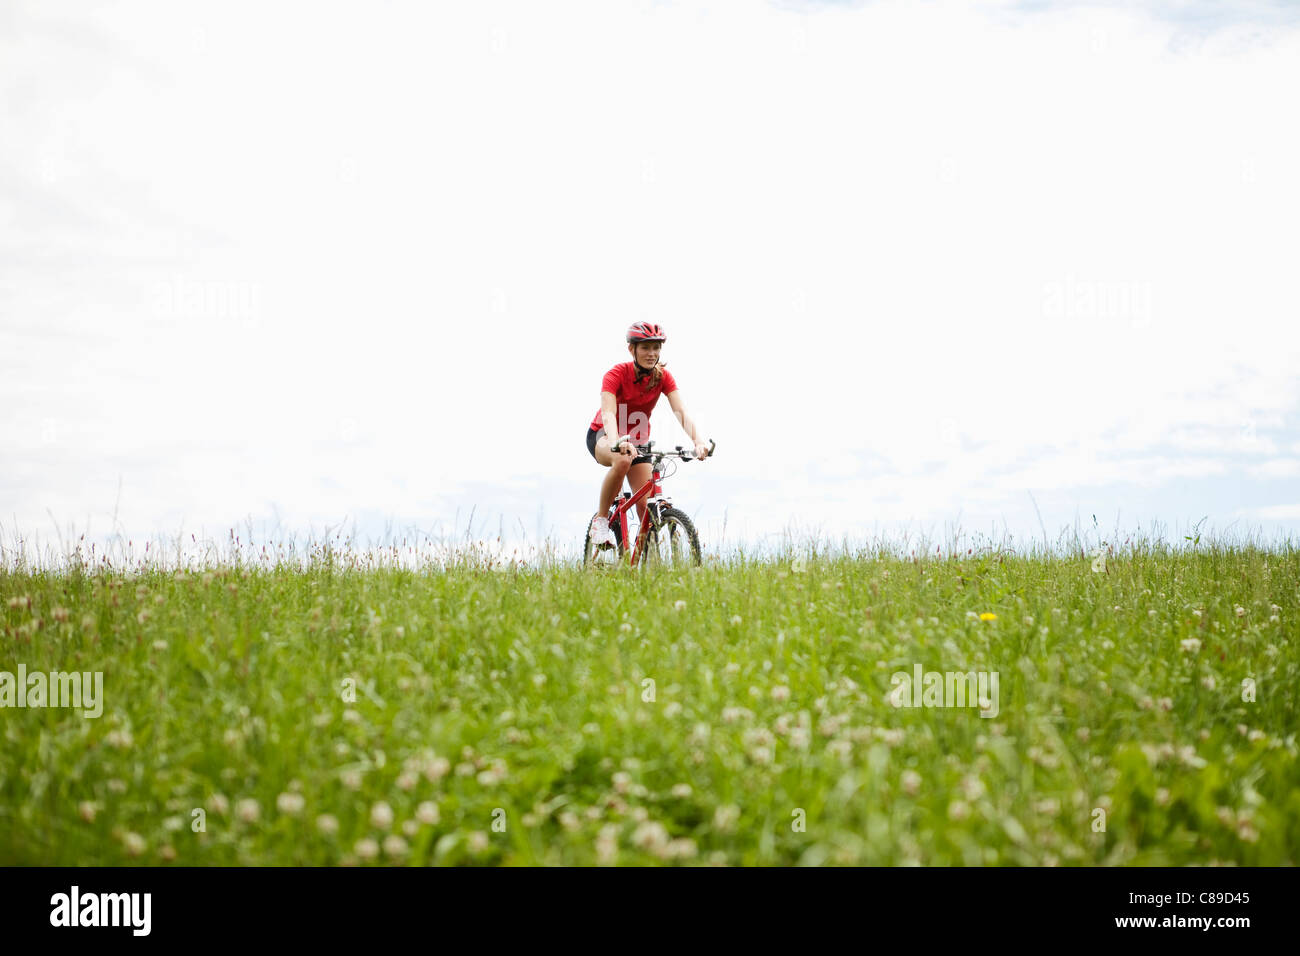 Germany, Bavaria, young woman riding mountain bike Banque D'Images